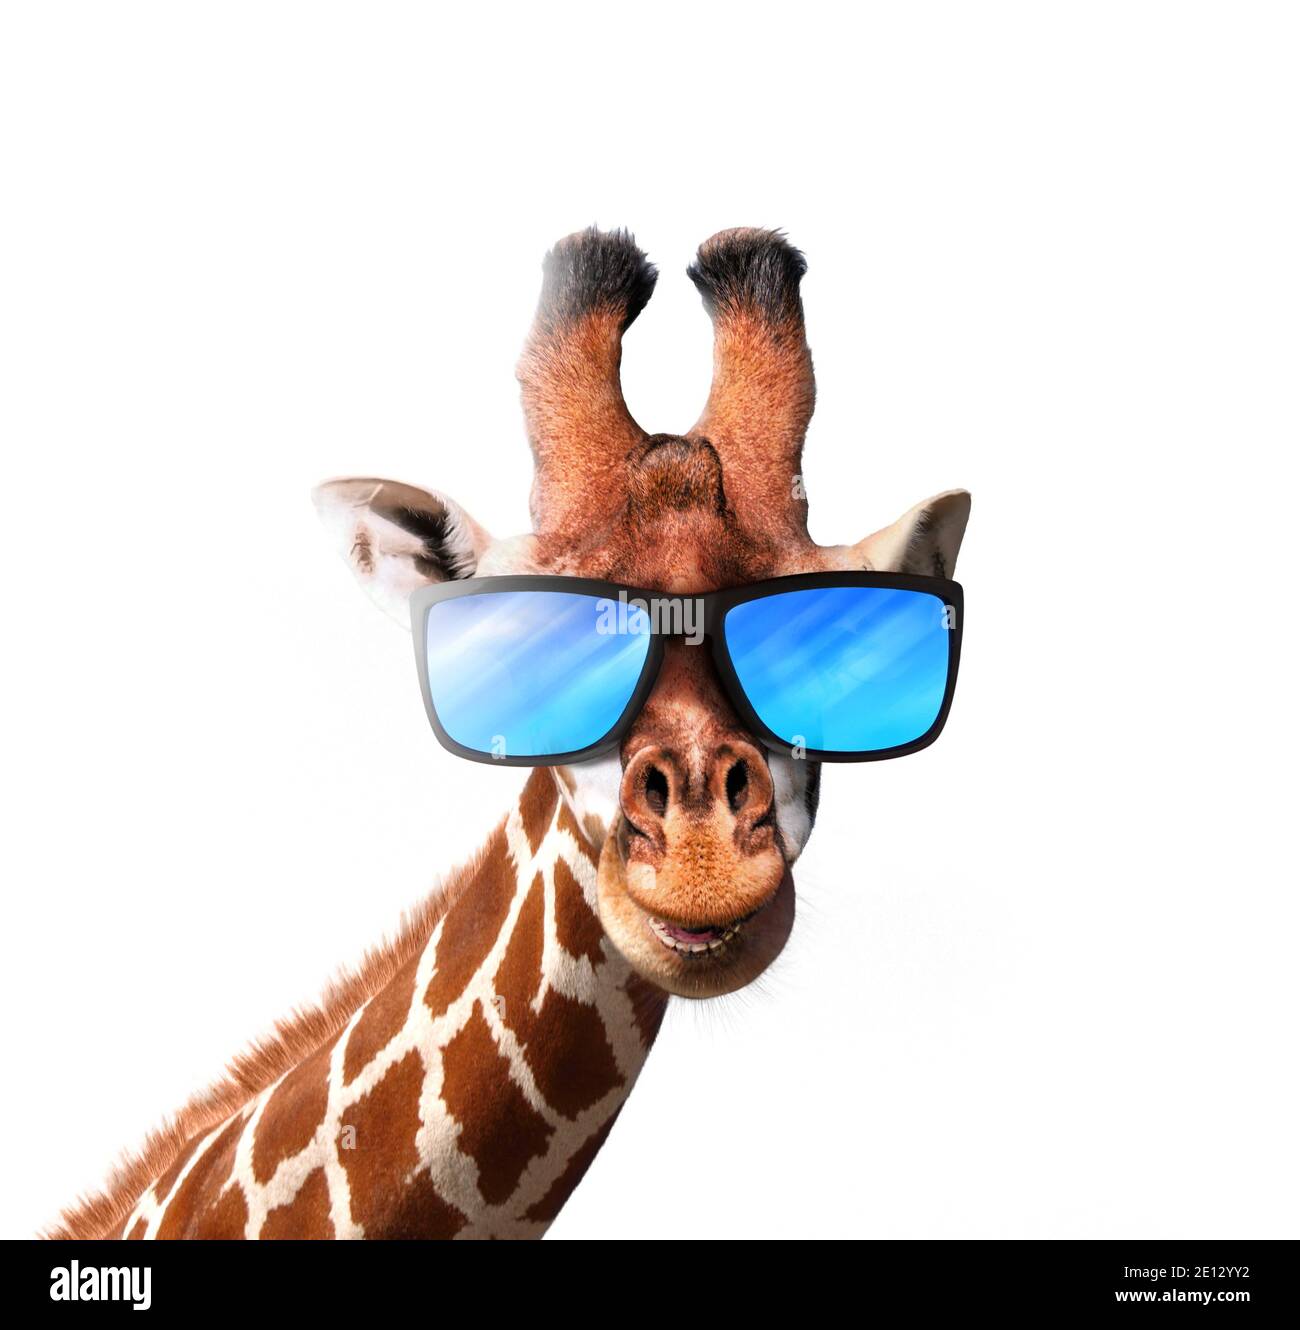 Smiling giraffe wearing a blue sunglasses isolated on white background Stock Photo